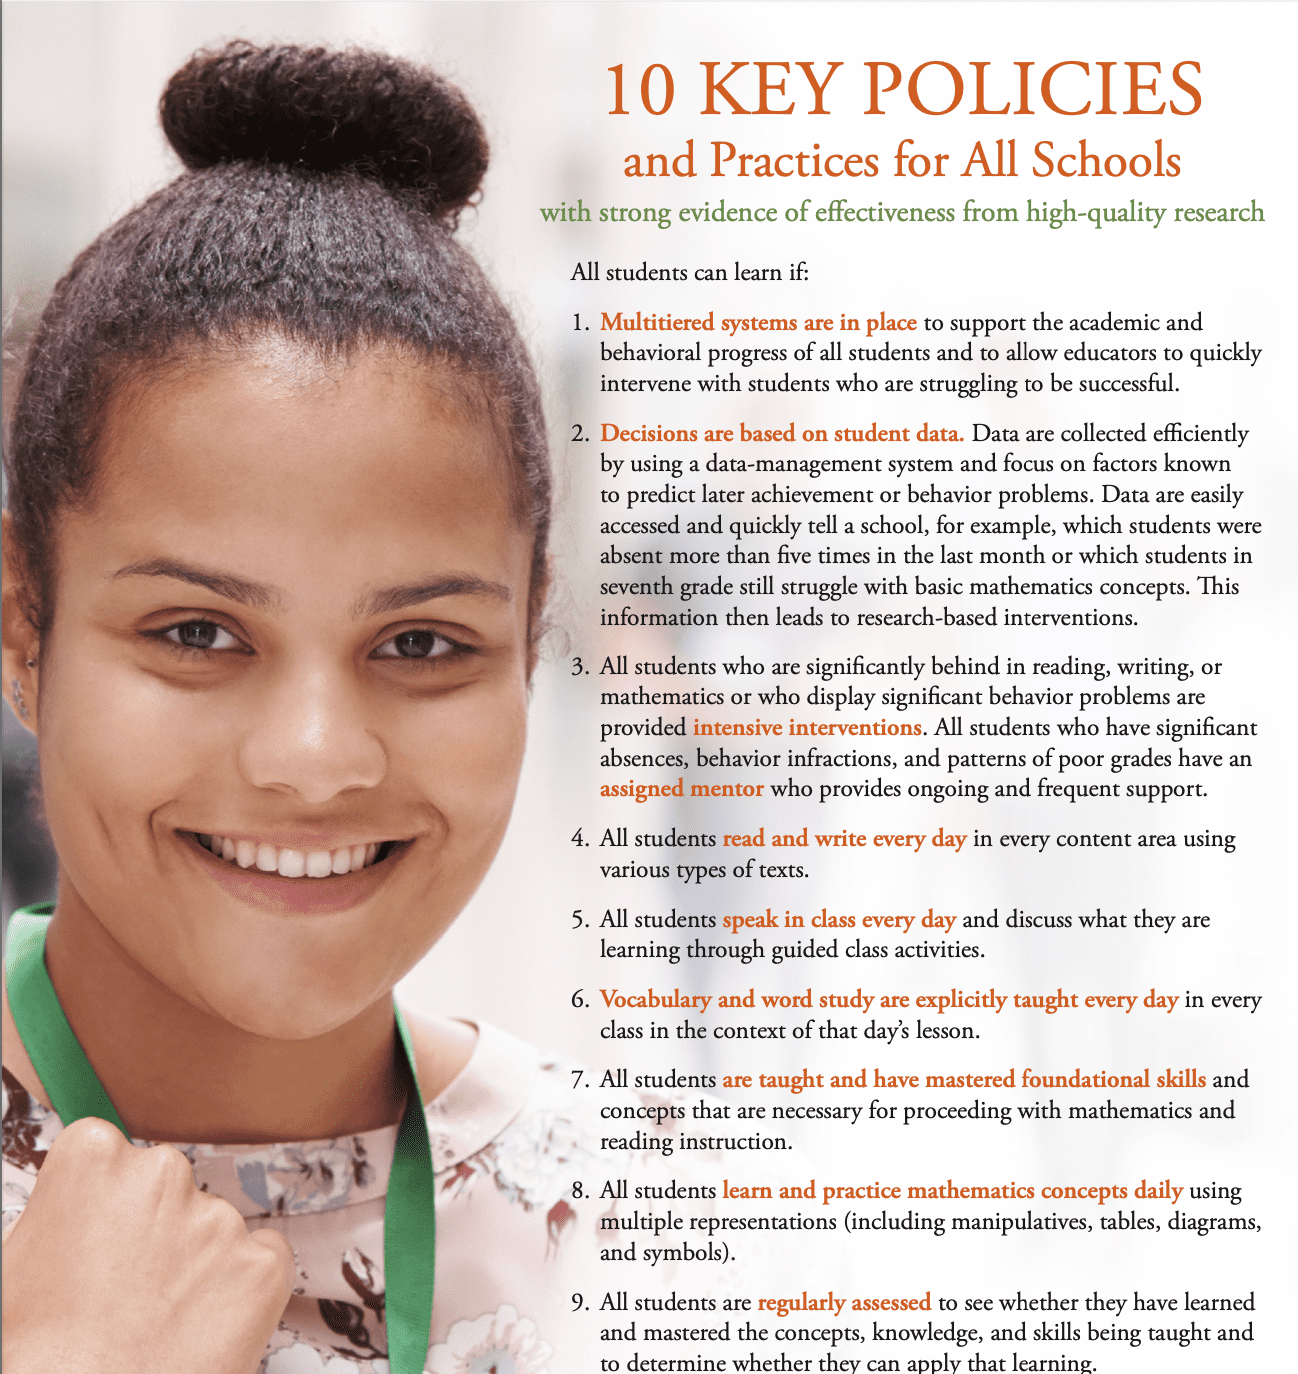 Cover of resource with key policies and photo of young Black girl